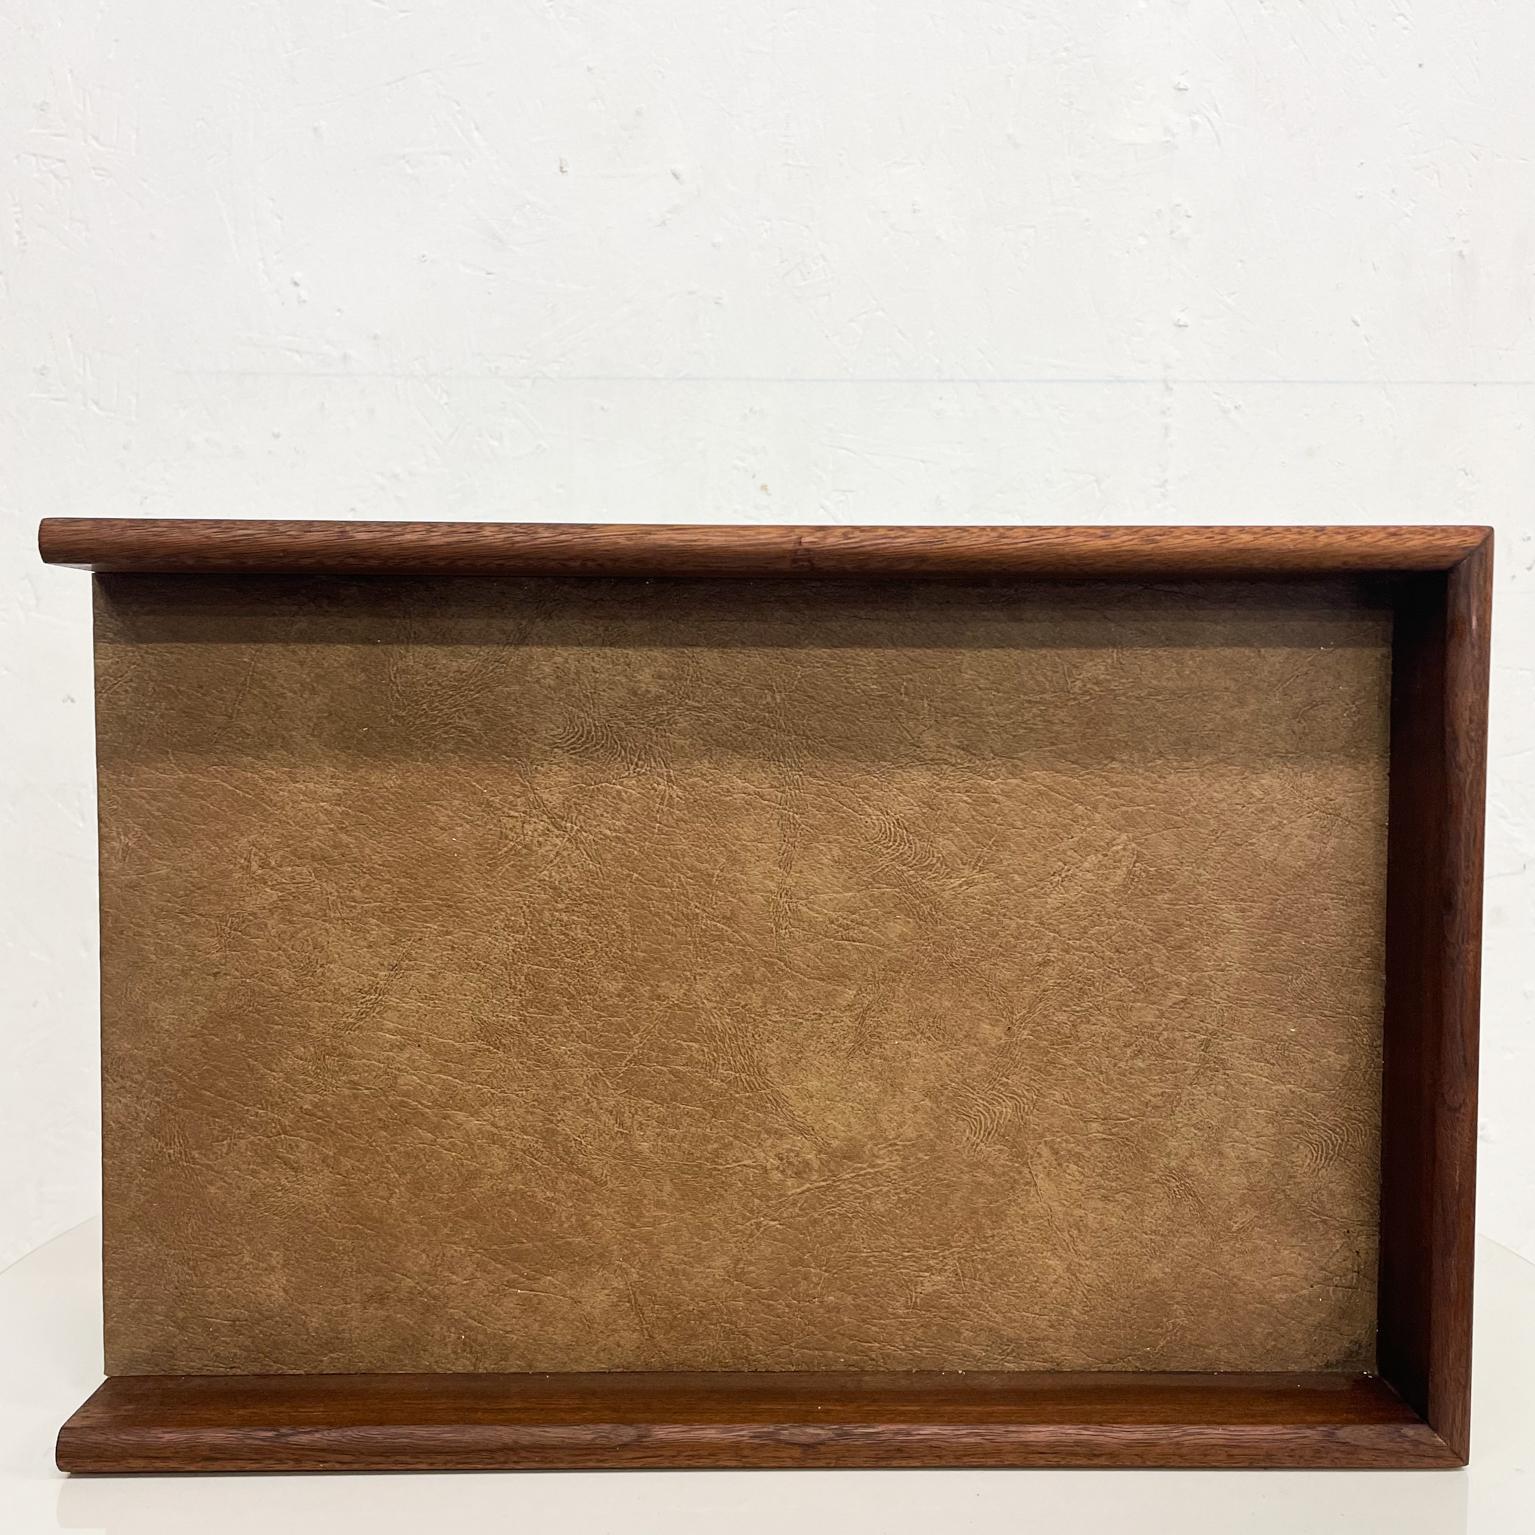 1970s Modern Two Tier Paper Tray Solid Walnut Wood and Bronze Desk Accessory 9